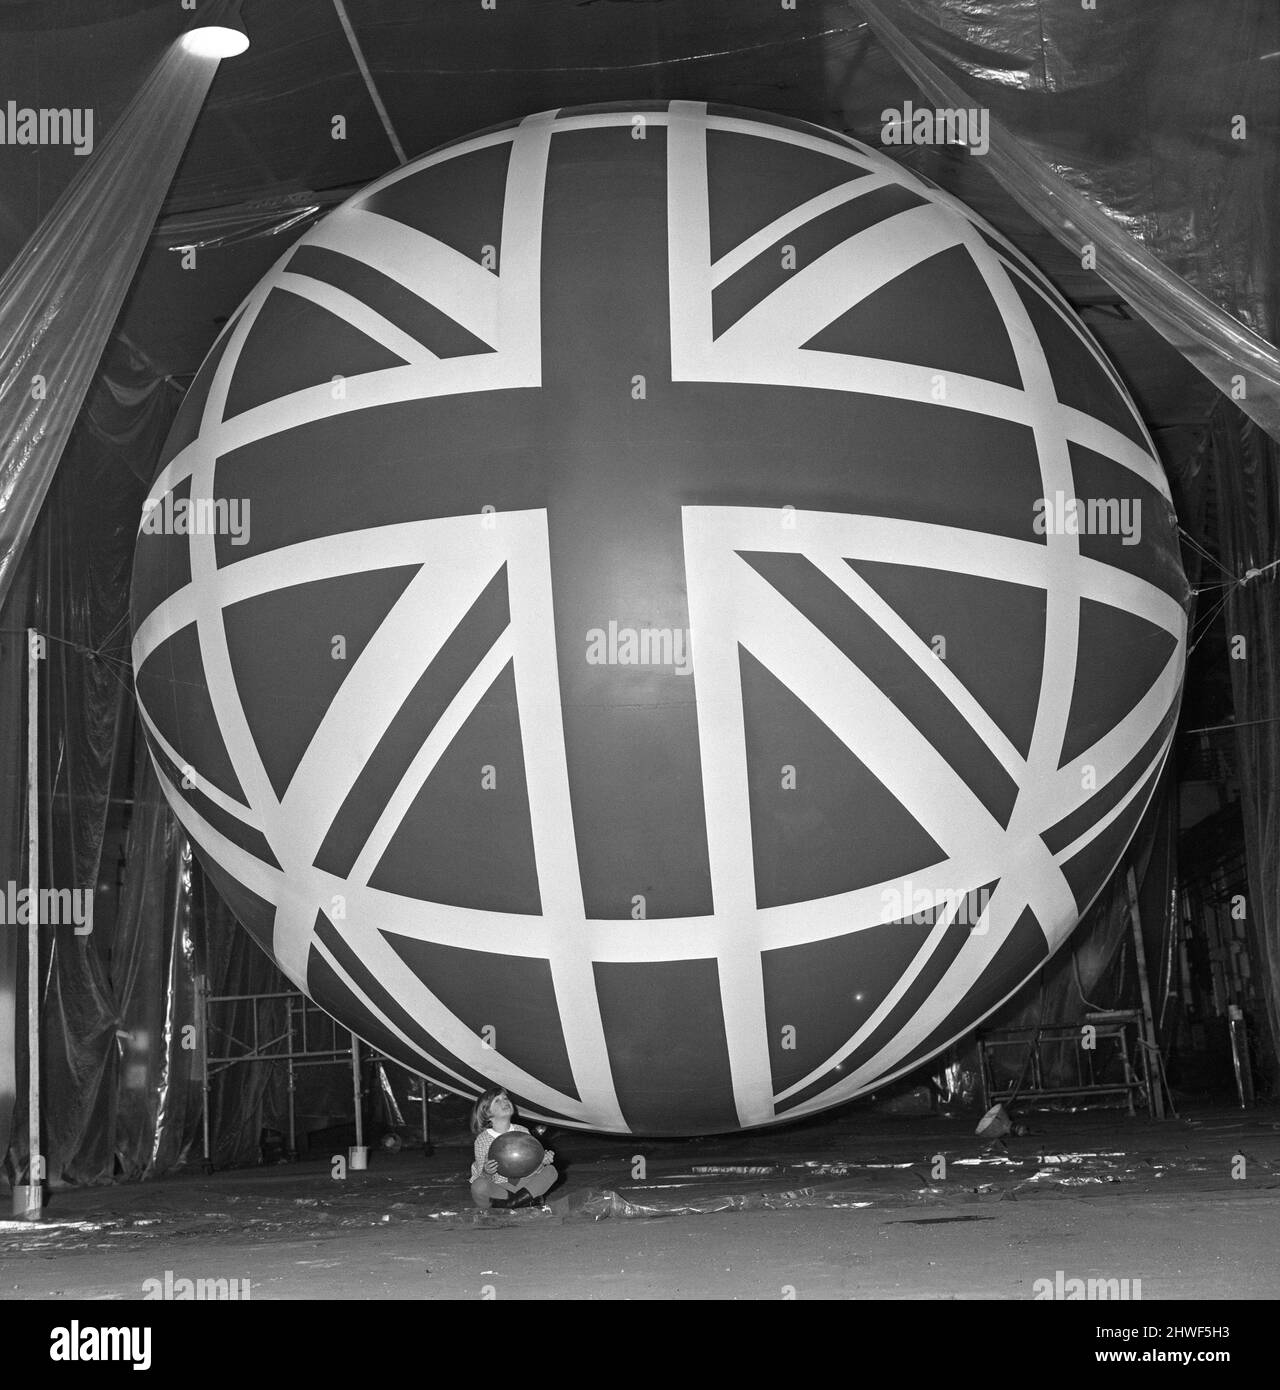 Union Jack Giant Balloon at Expo 70 Little Miss Susan Howlett, five, is dwarfed by the huge balloon destined to fly over the British pavilion at the Expo 70.   The exhibition will open at Osaka, Japan in March 1970.  The balloon is 20 feet in diameter  Lynne is employed by Loyne Limited, of Ashton under Lyne, Lancashire, where the balloons are being given a special flexible type of coating.  Picture taken 31st December 1969 Stock Photo